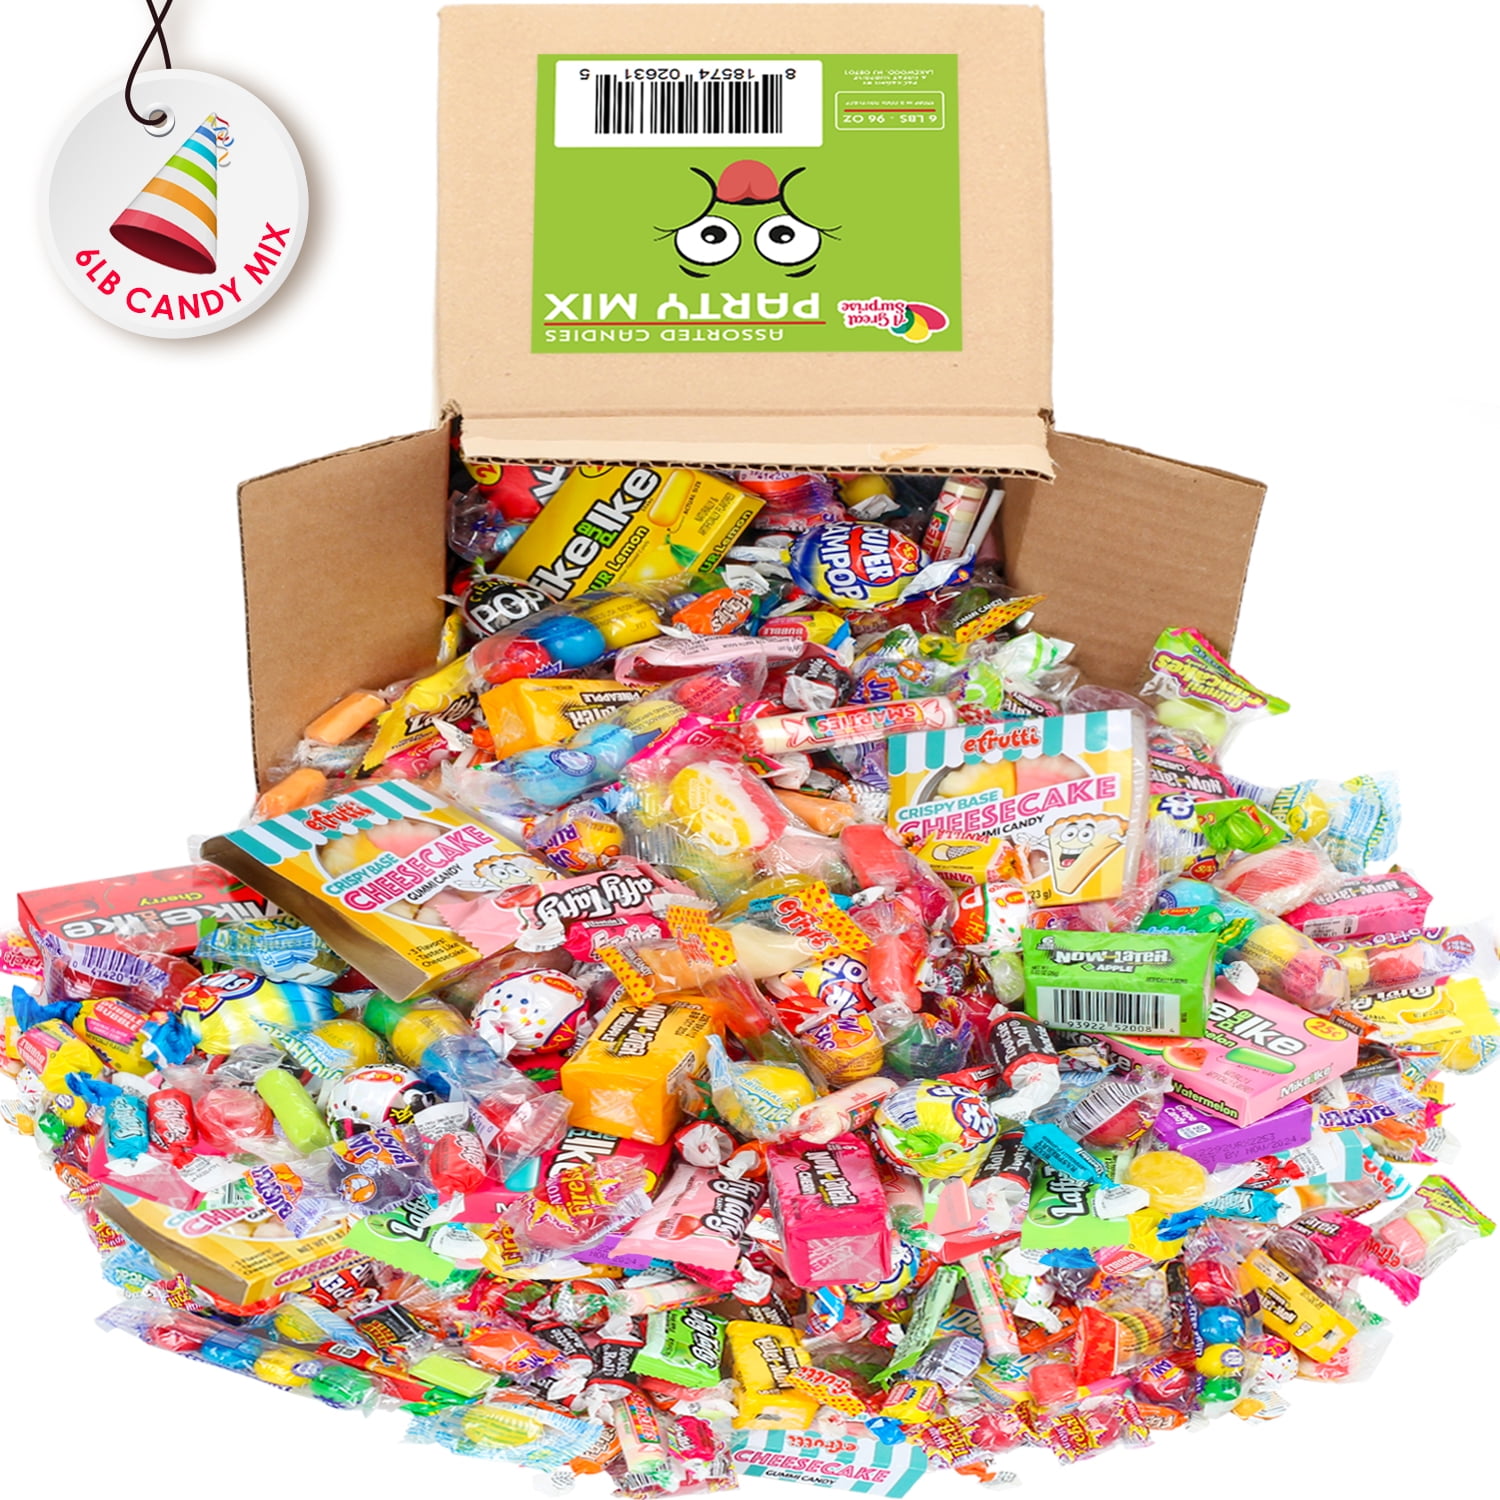 Buy Brilliant Bulk Candy Containers At Irresistible Deals